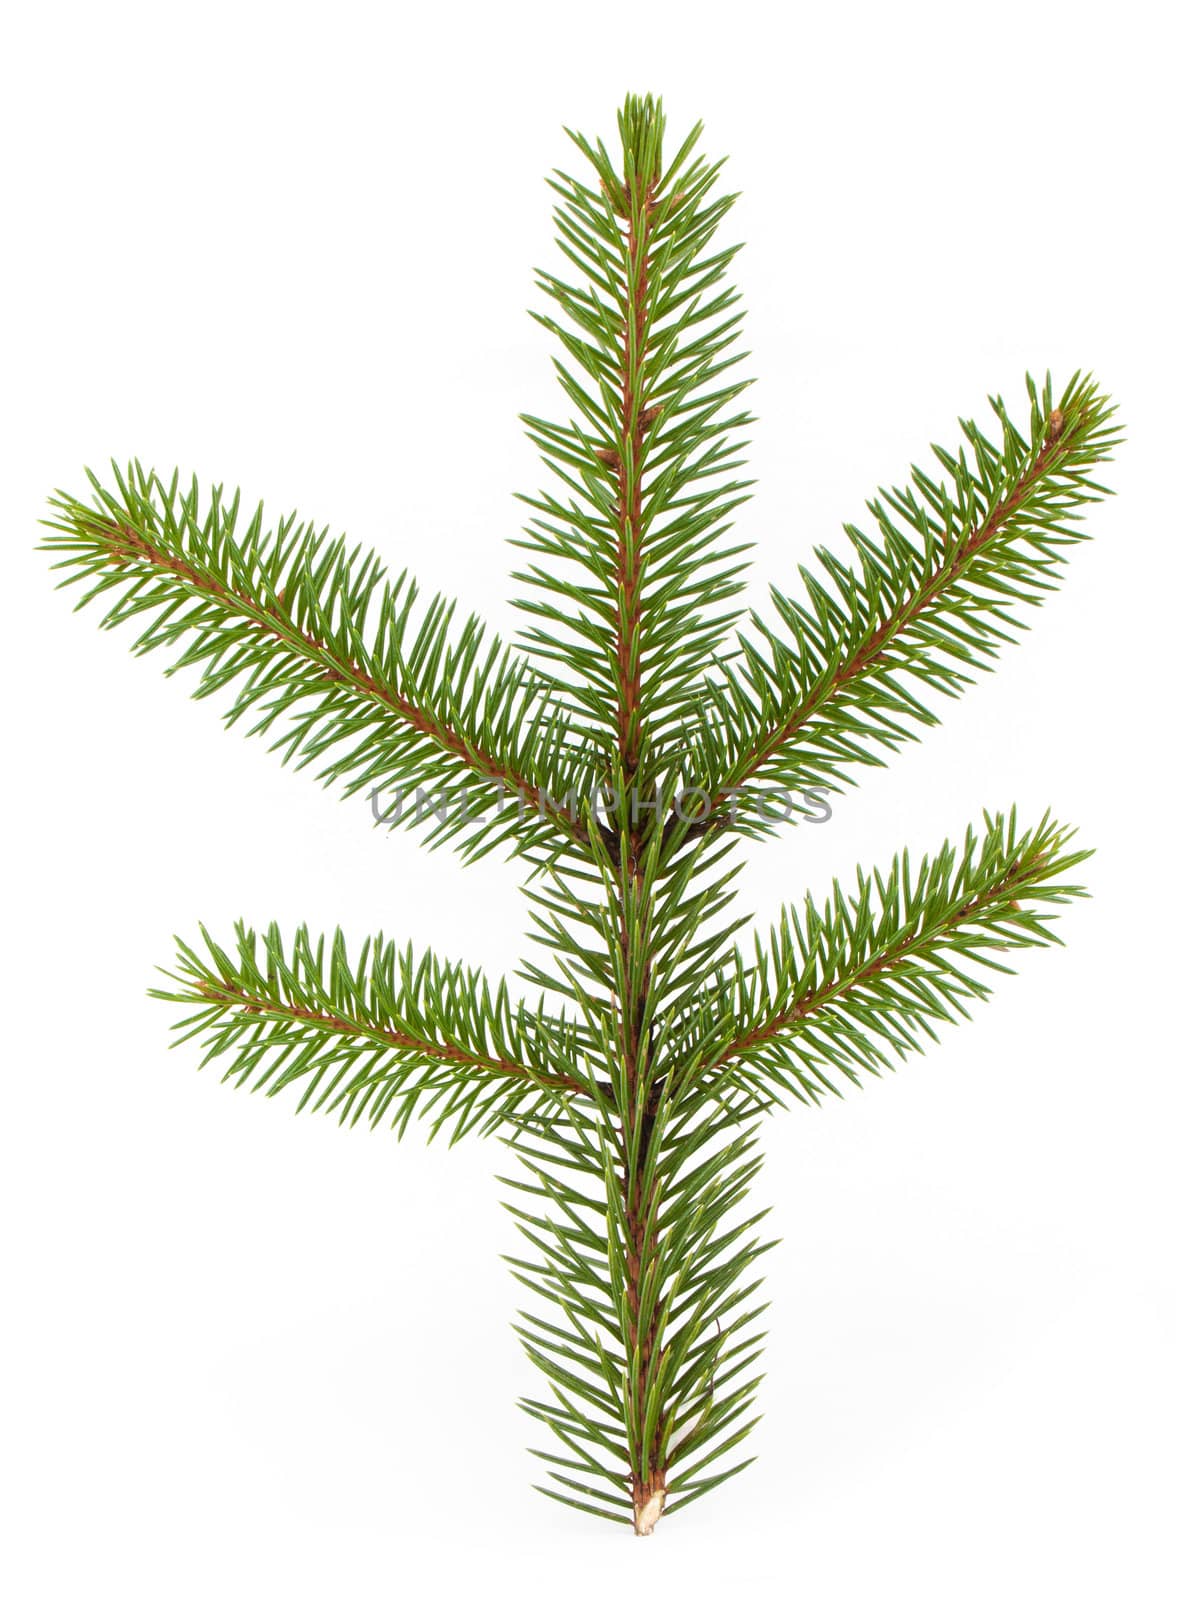 Pine tree branch isolated on white backgrond